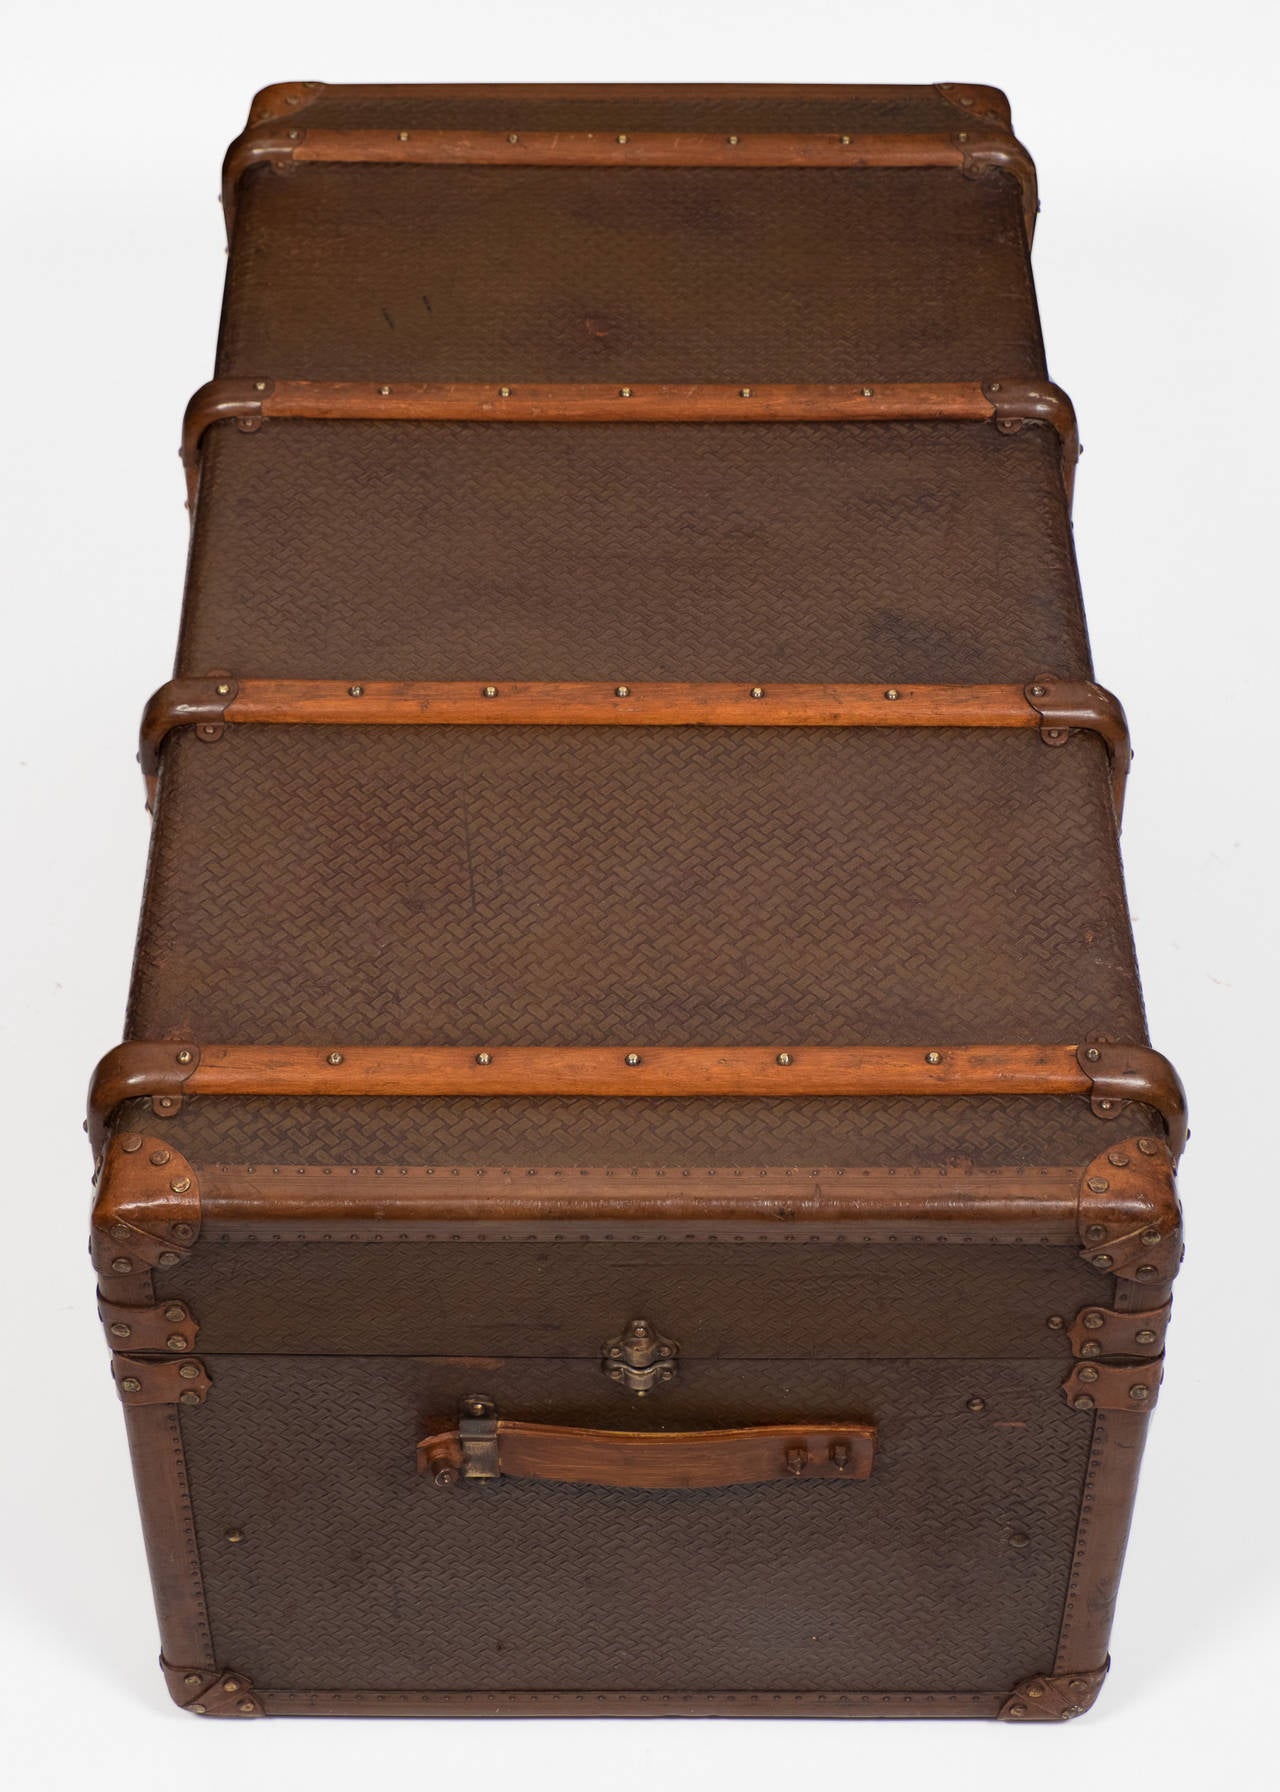 20th Century French Vintage Travel Trunk in the Style of Vuitton